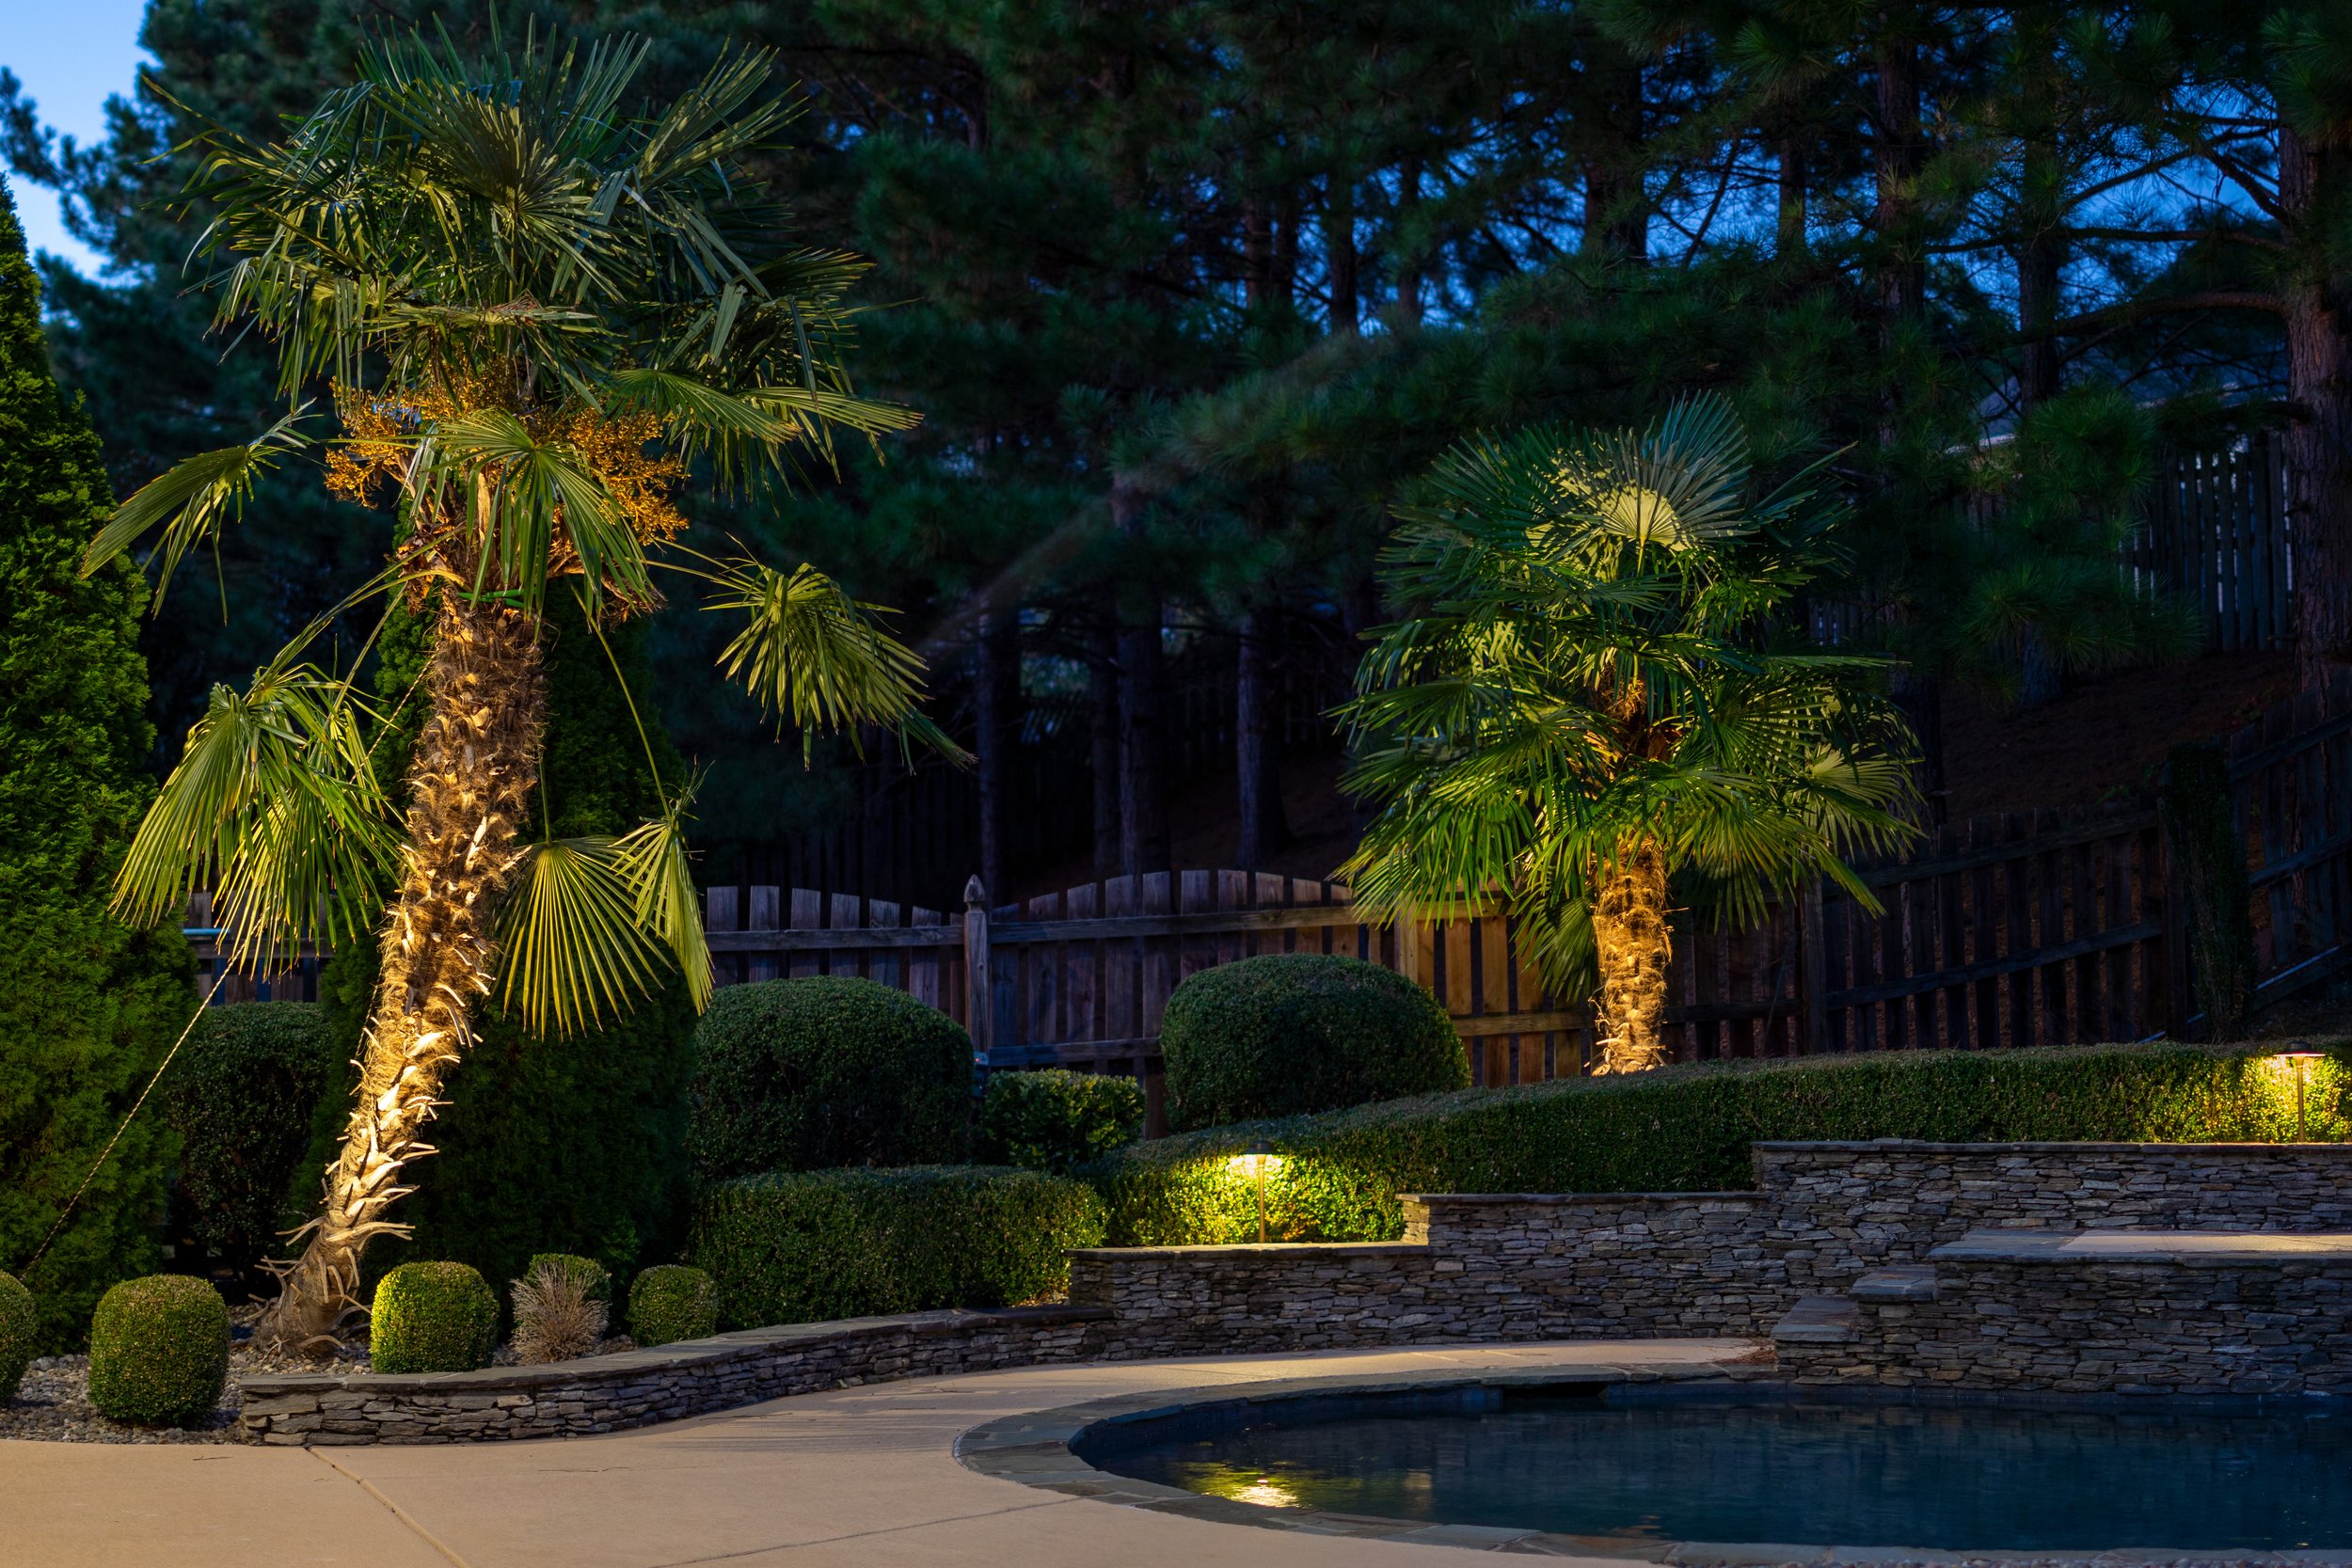  Landscaped poolside area with small stair stepped retaining wall accented with landscape lighting and path lights.  